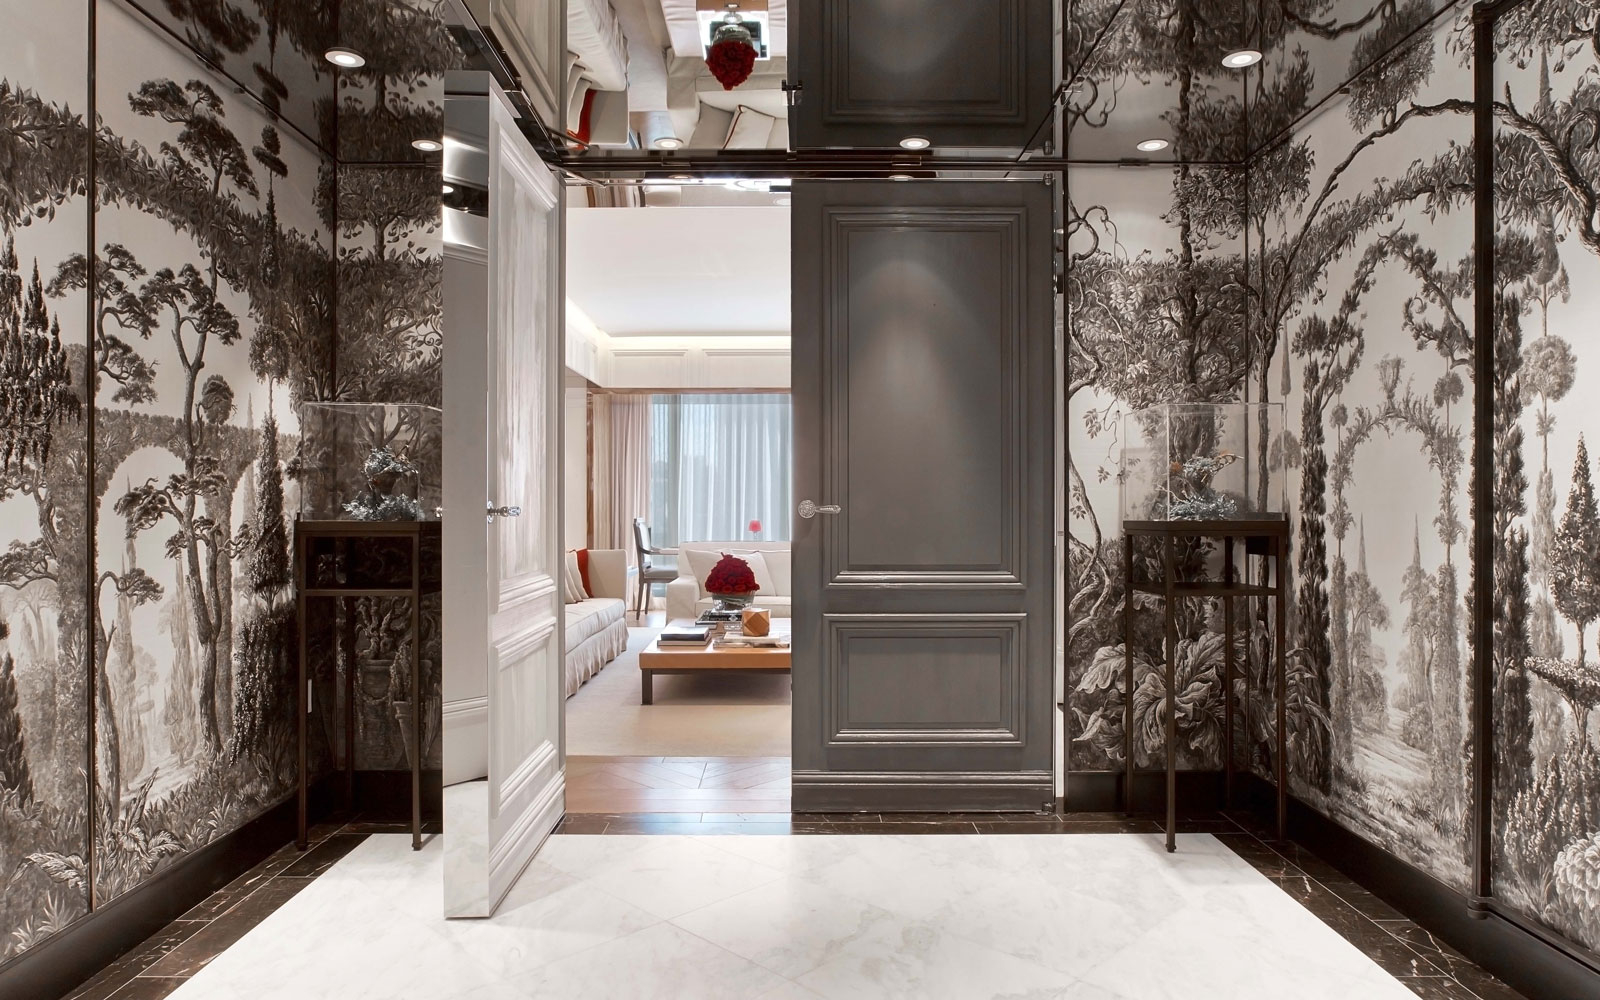 The Suite Life: The $18,000-a-Night Baccarat Suite at NYC's Baccarat Hotel